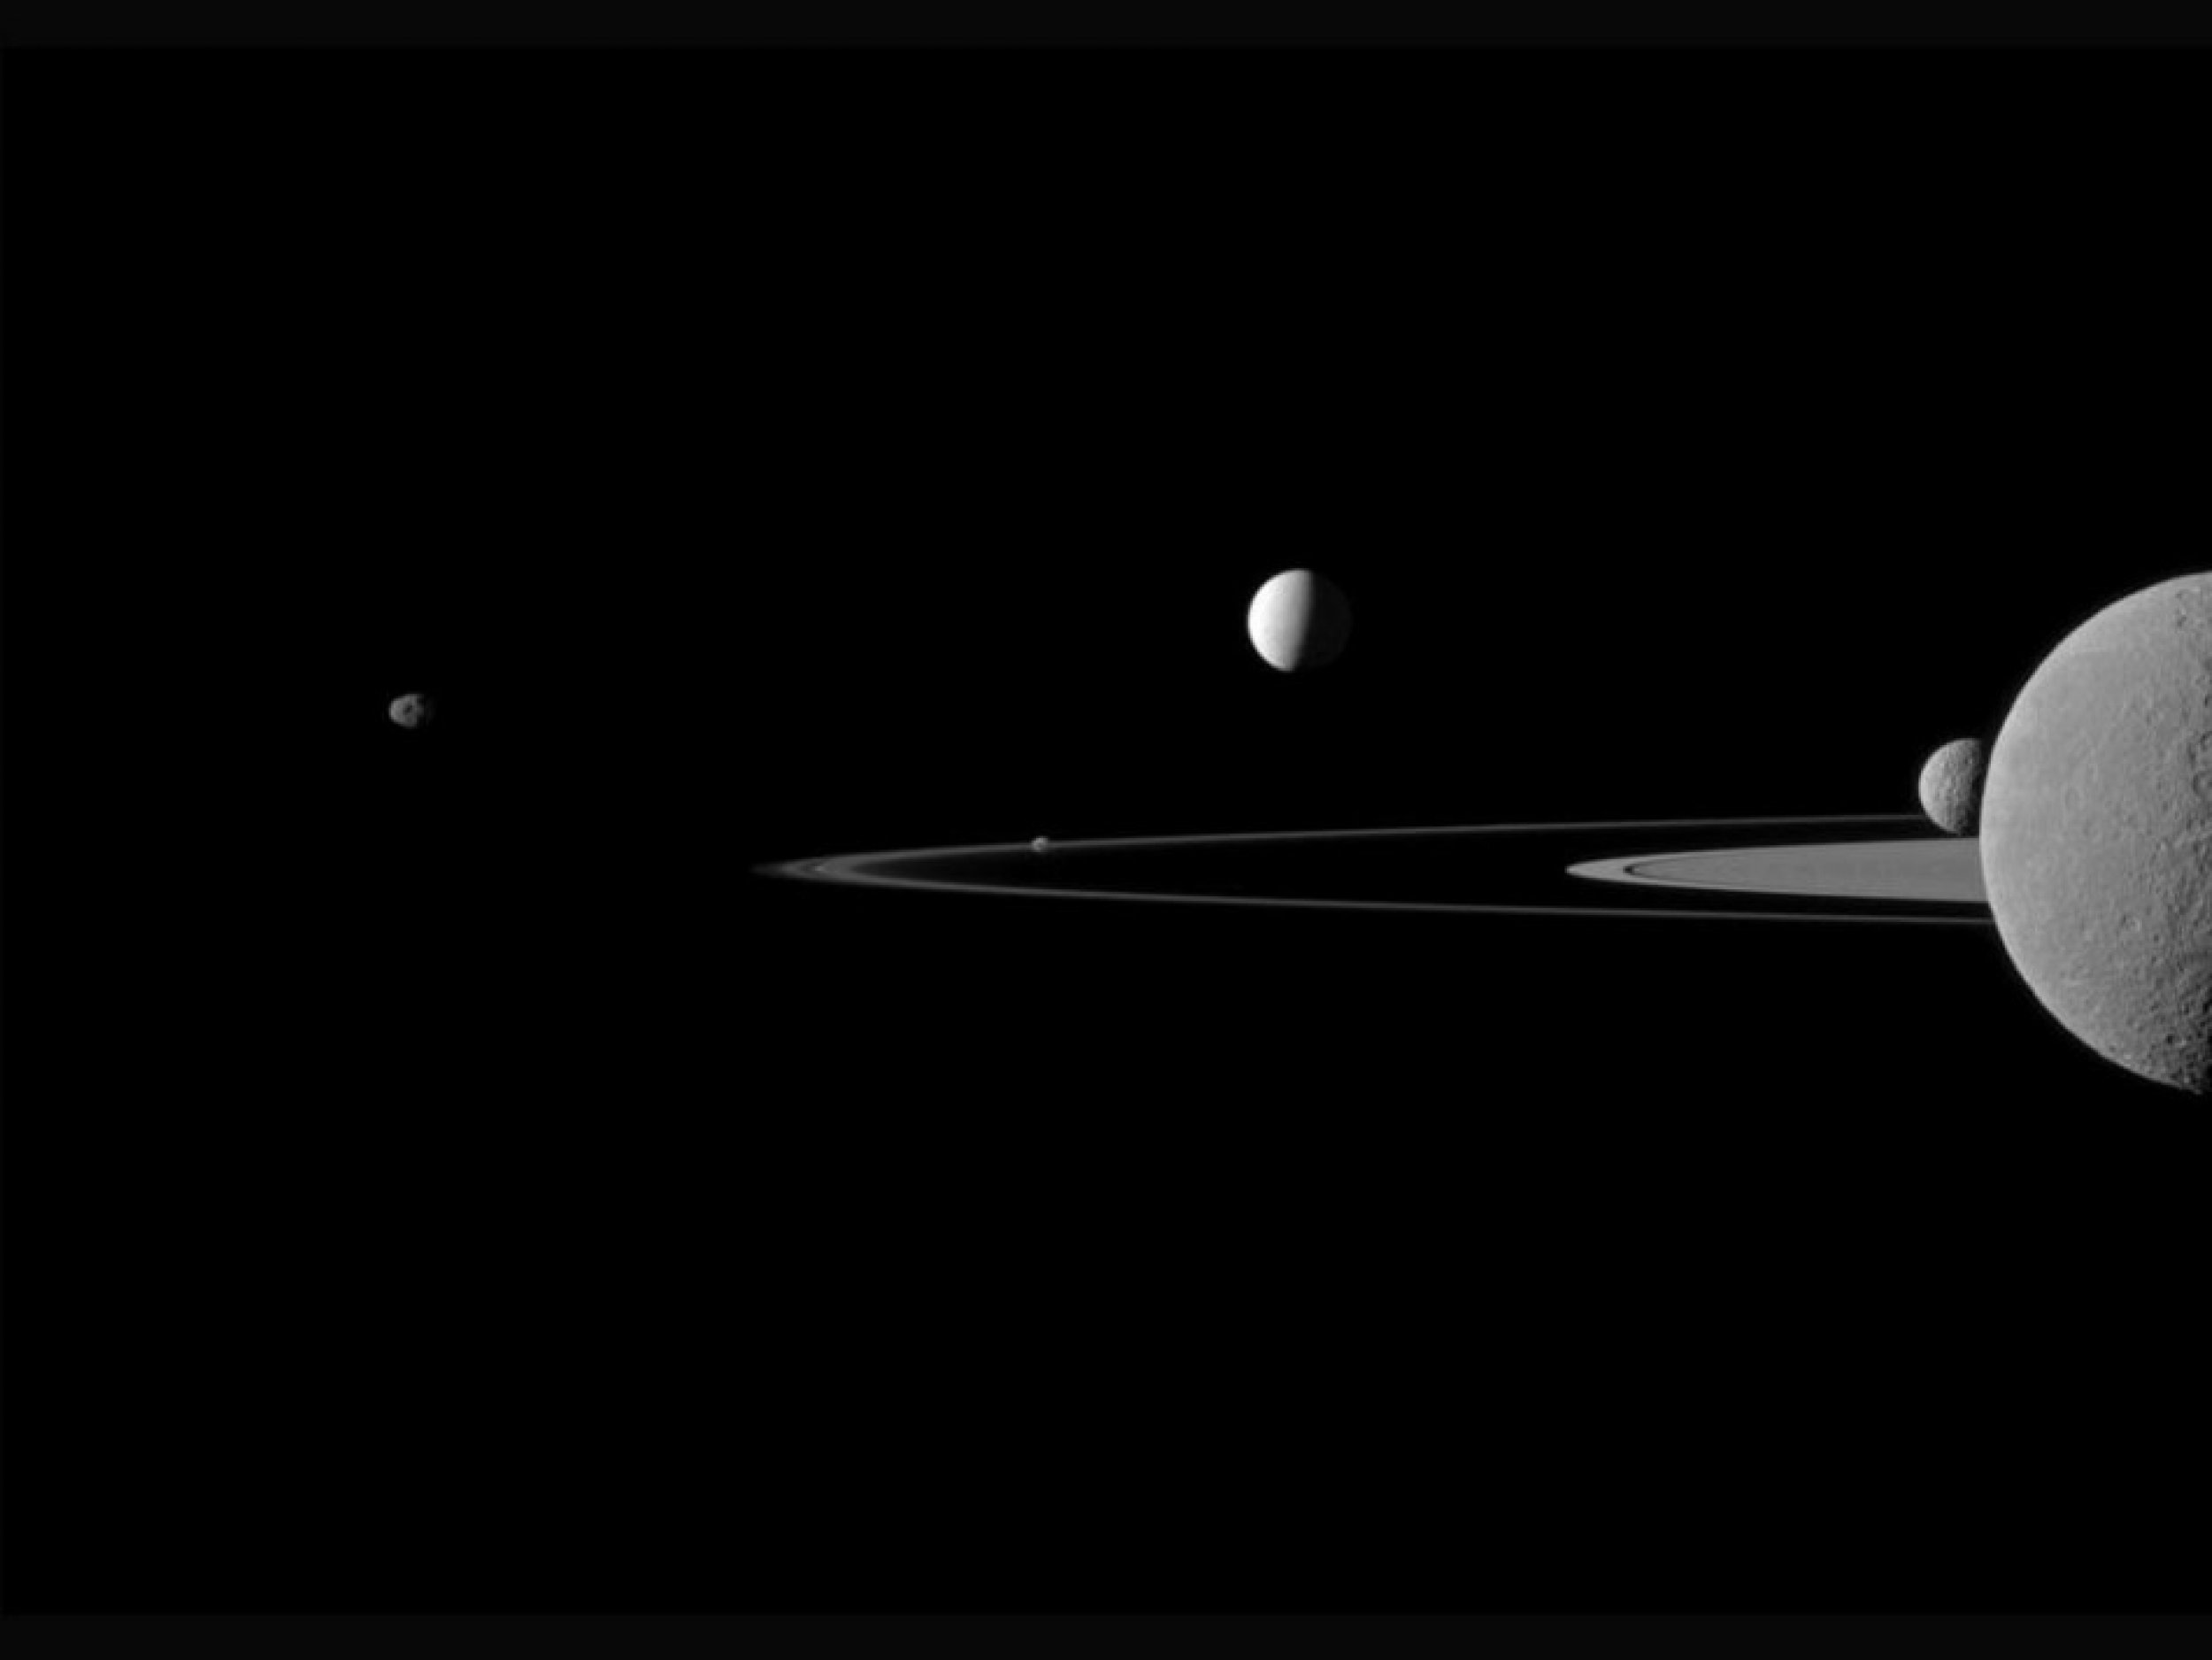 Five moons of planet Saturn Saturn has 62 moons with confirmed orbits